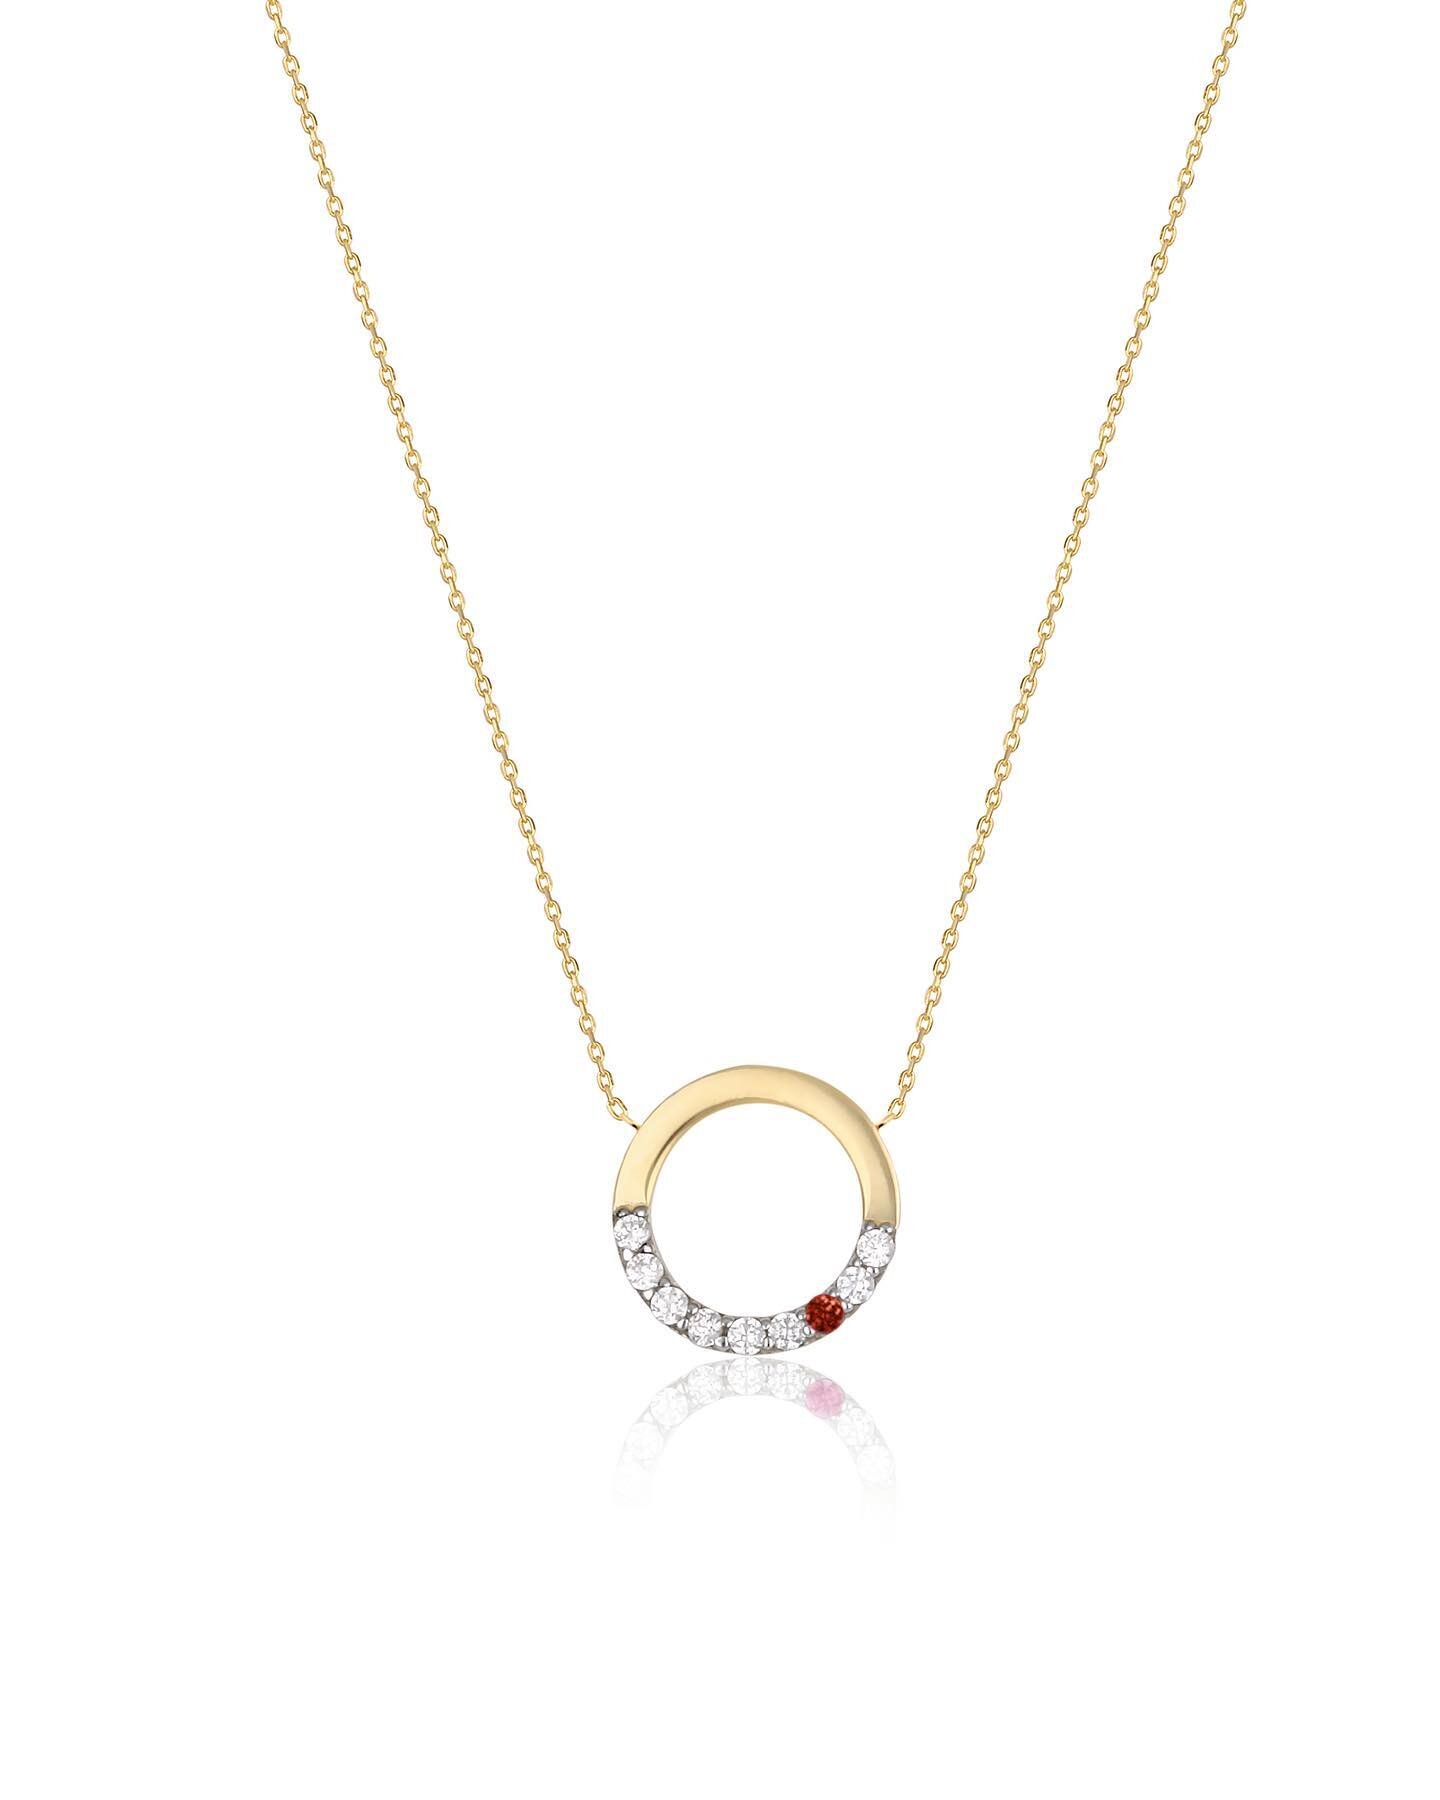 Oh la la! The Circle of Love necklace with a touch of red is specially developed to emphasize love ❤️ 
Gold necklace made of ethical gold with cubic zirconia 

In stores now!
DM us for a store near you

#swingjewels #swing #jewels #circleoflove #gold